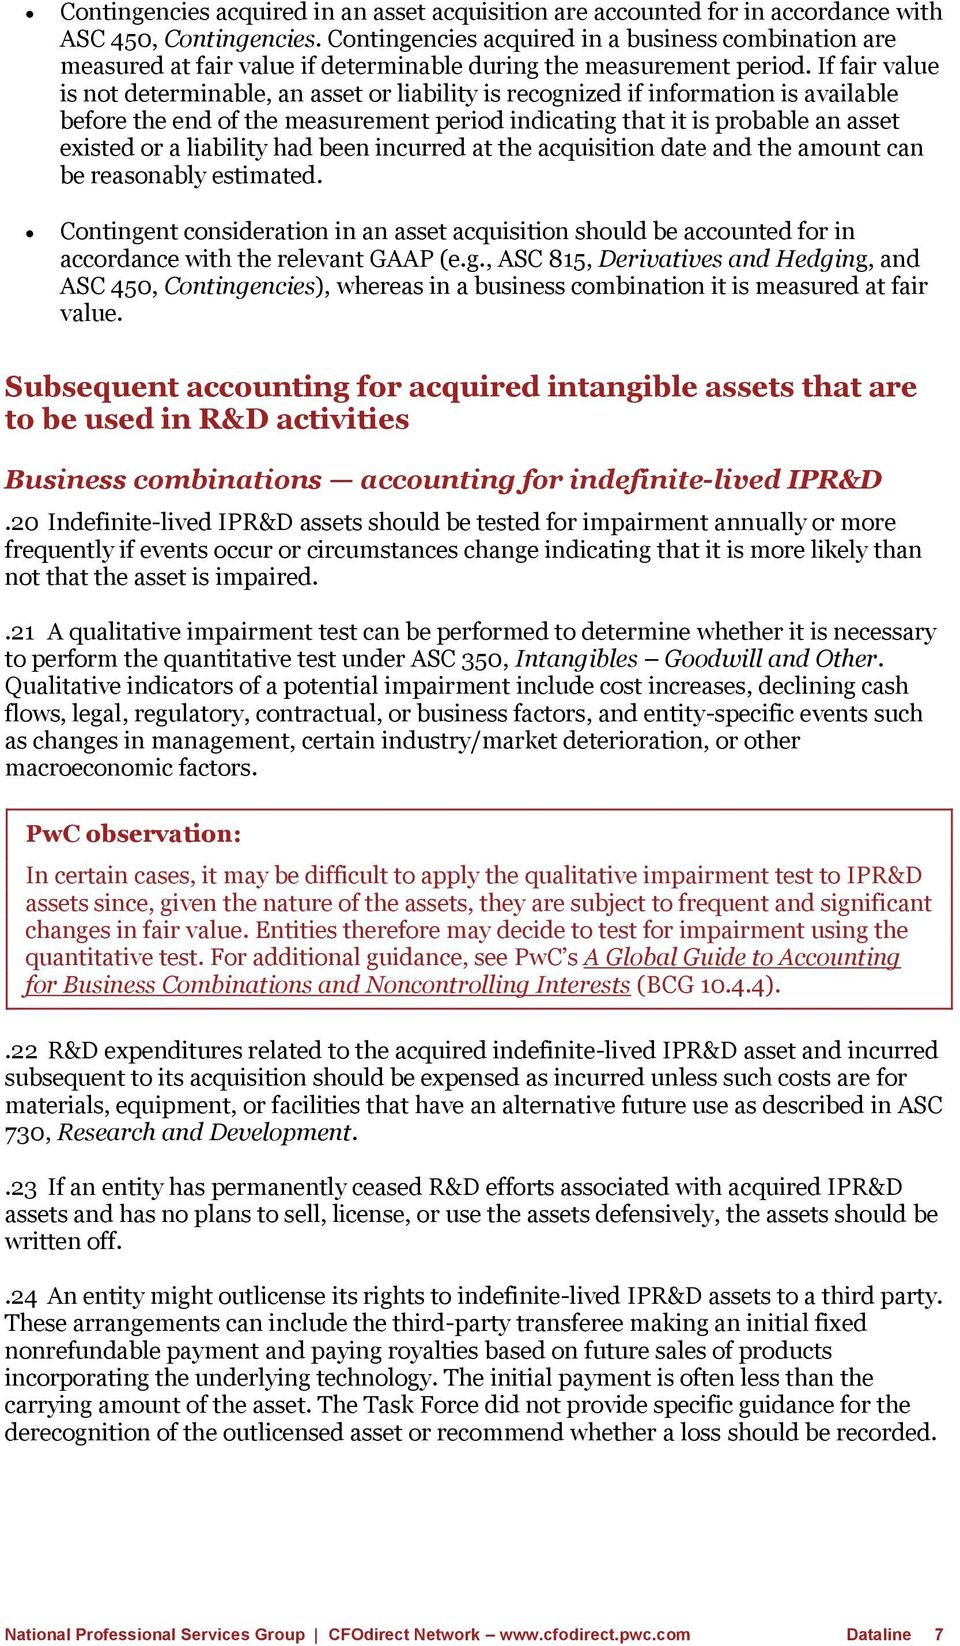 If fair value is not determinable, an asset or liability is recognized if information is available before the end of the measurement period indicating that it is probable an asset existed or a